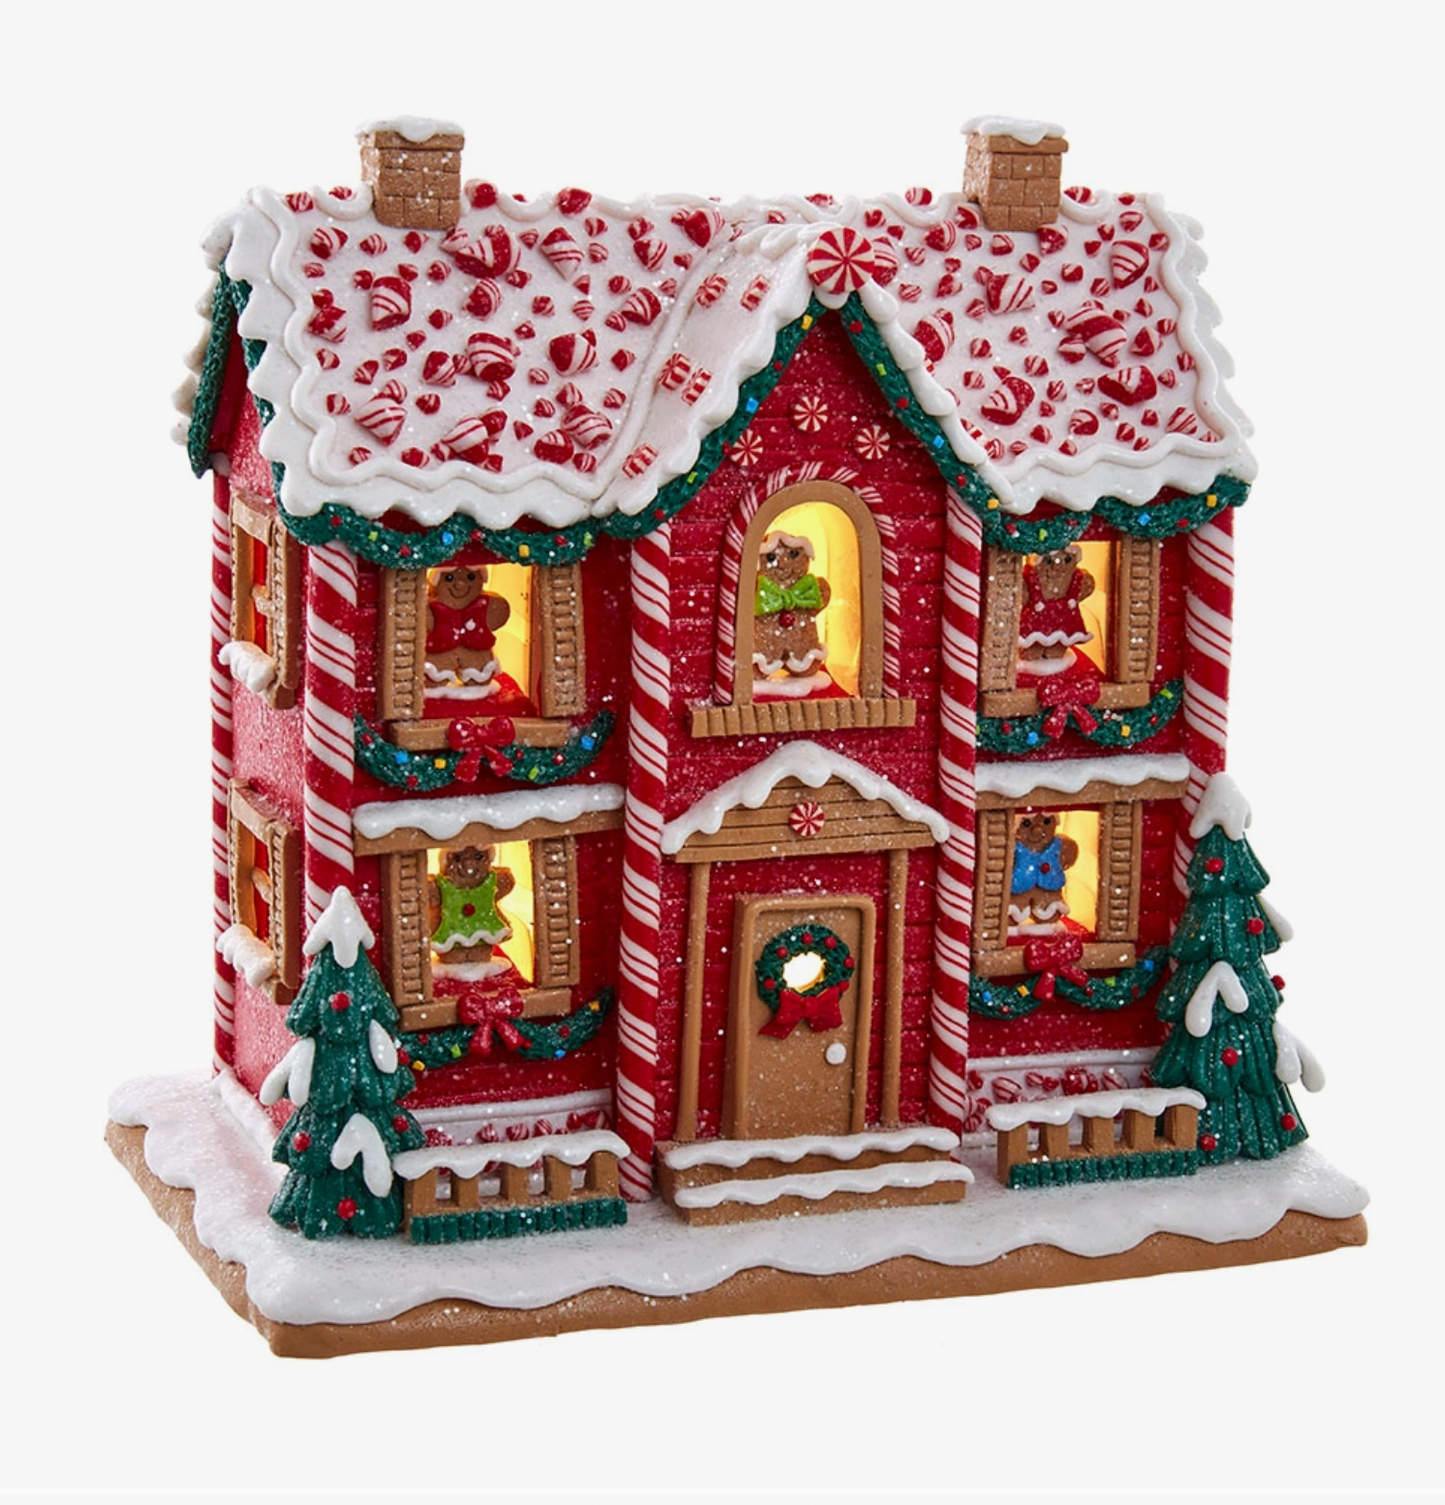 Lighted & Musical Gingerbread House